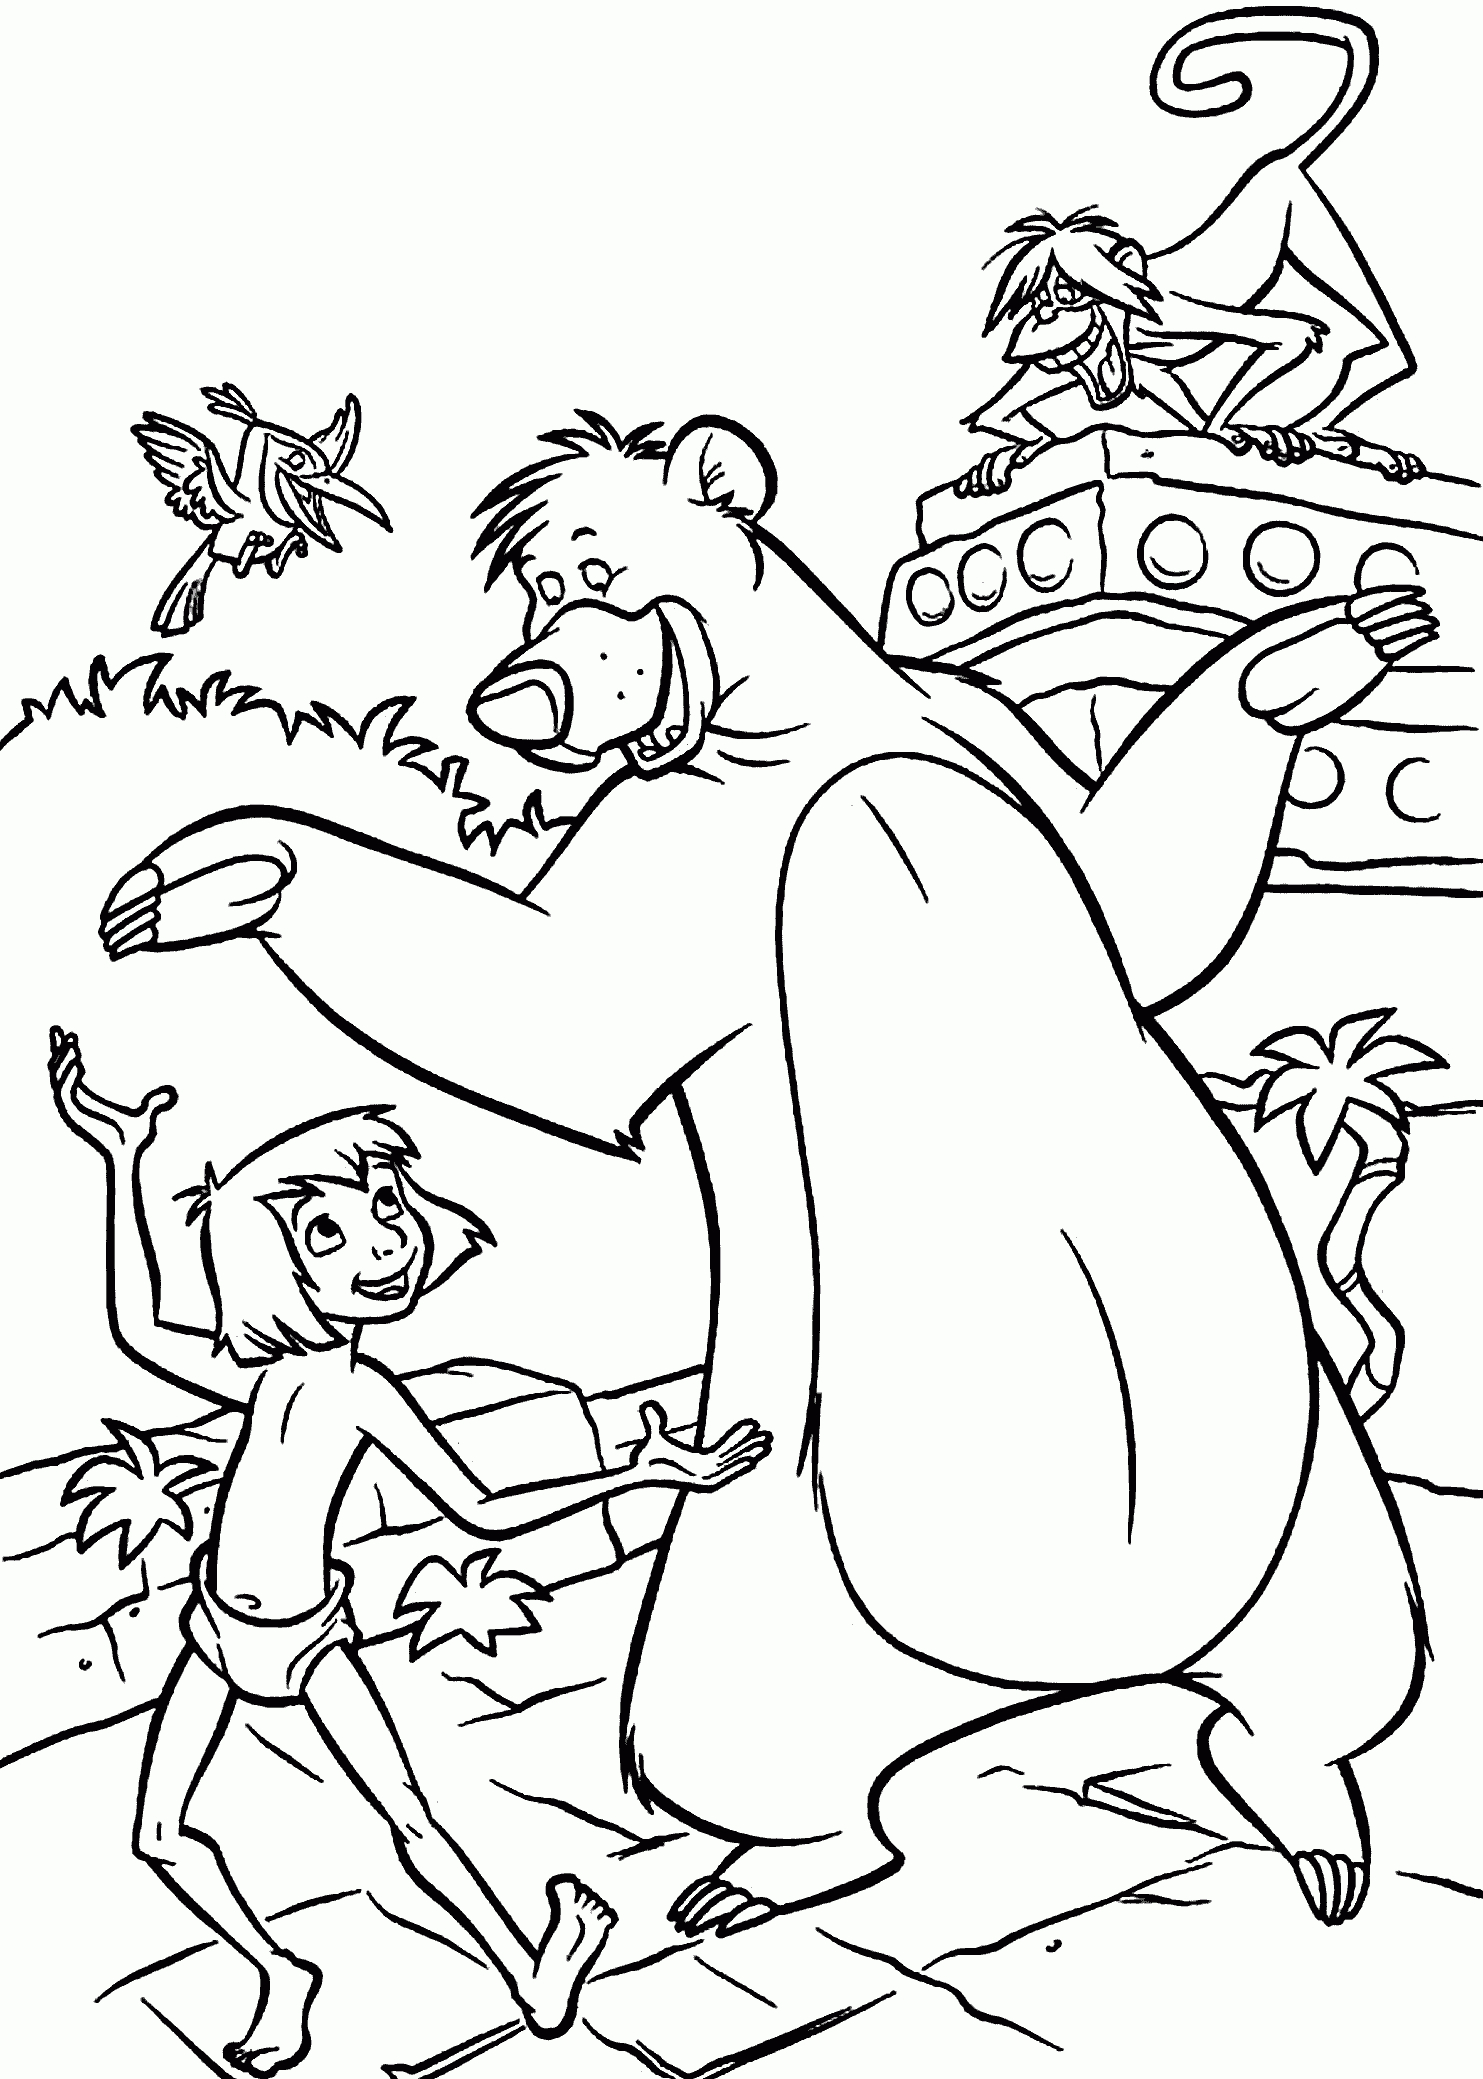 Coloring Pages Of Jungle Book - Coloring Home - Free Printable Jungle Book Masks